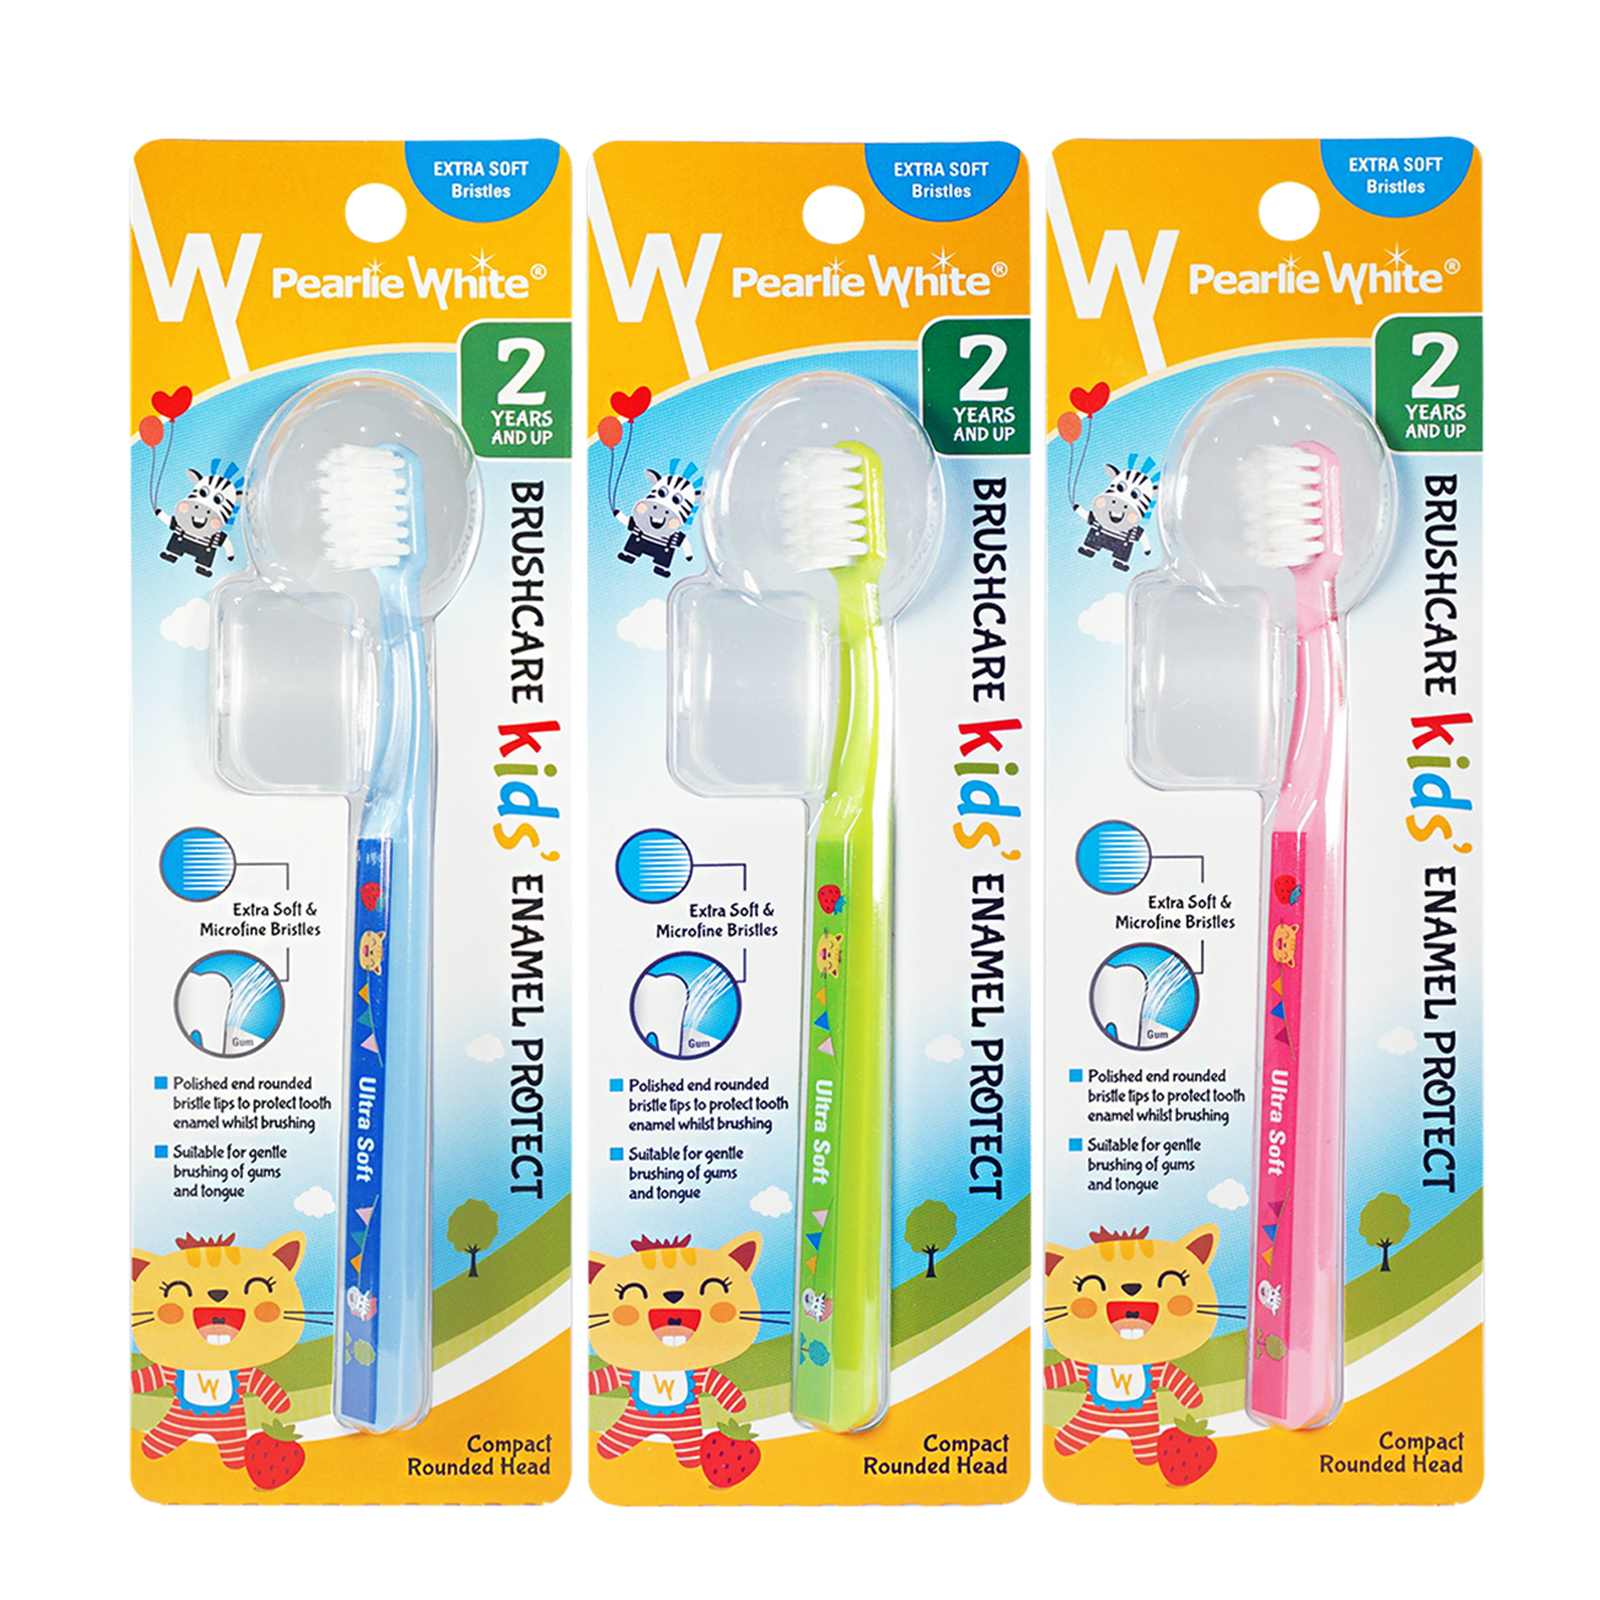 Pearlie White Enamel Protect Extra Soft Kids Toothbrush (Pack of 3)